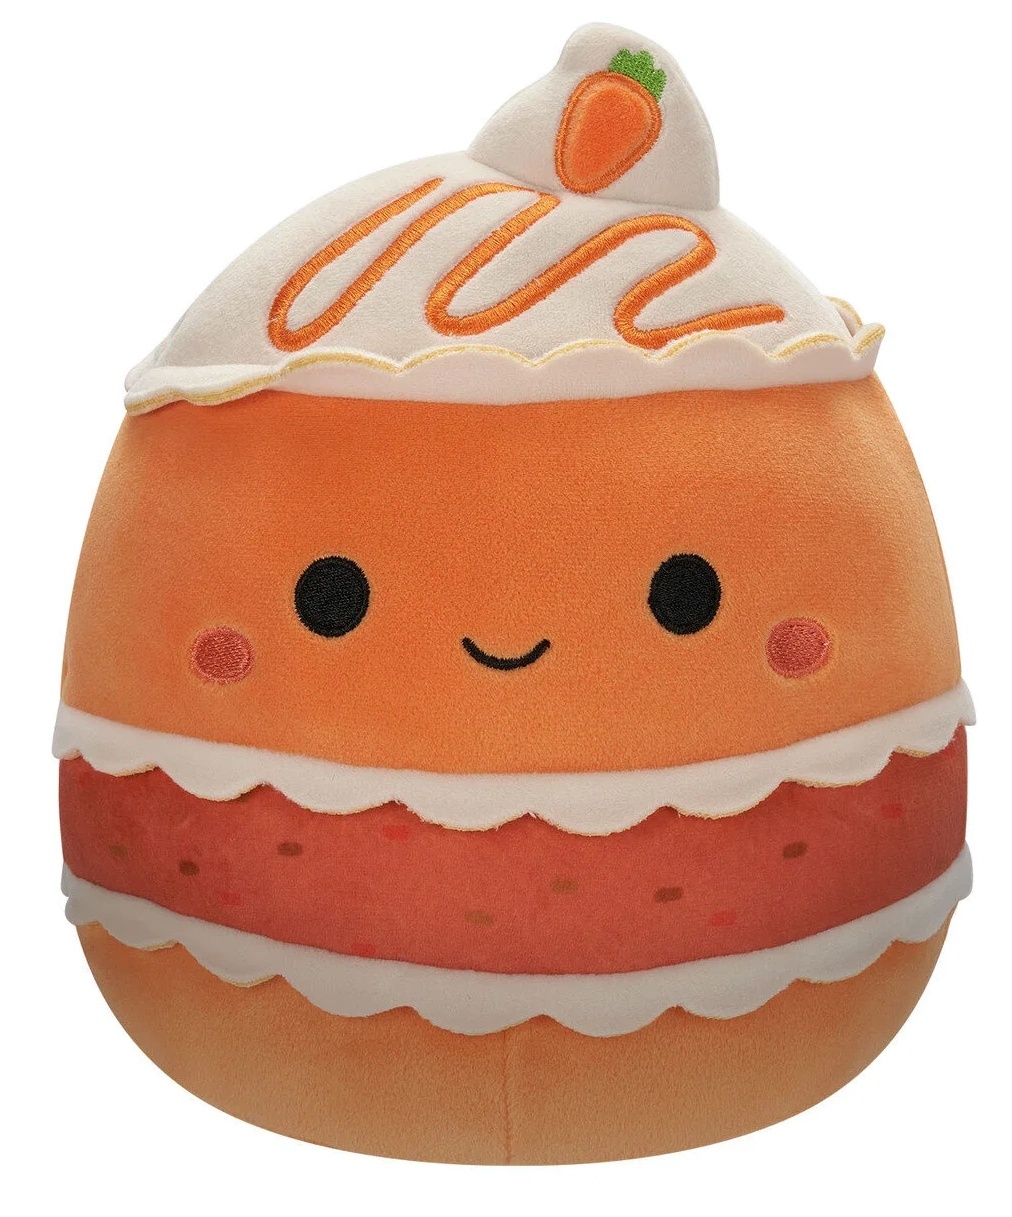 Мягкая игрушка Squishmallows Carrot Cake (SQER00835)